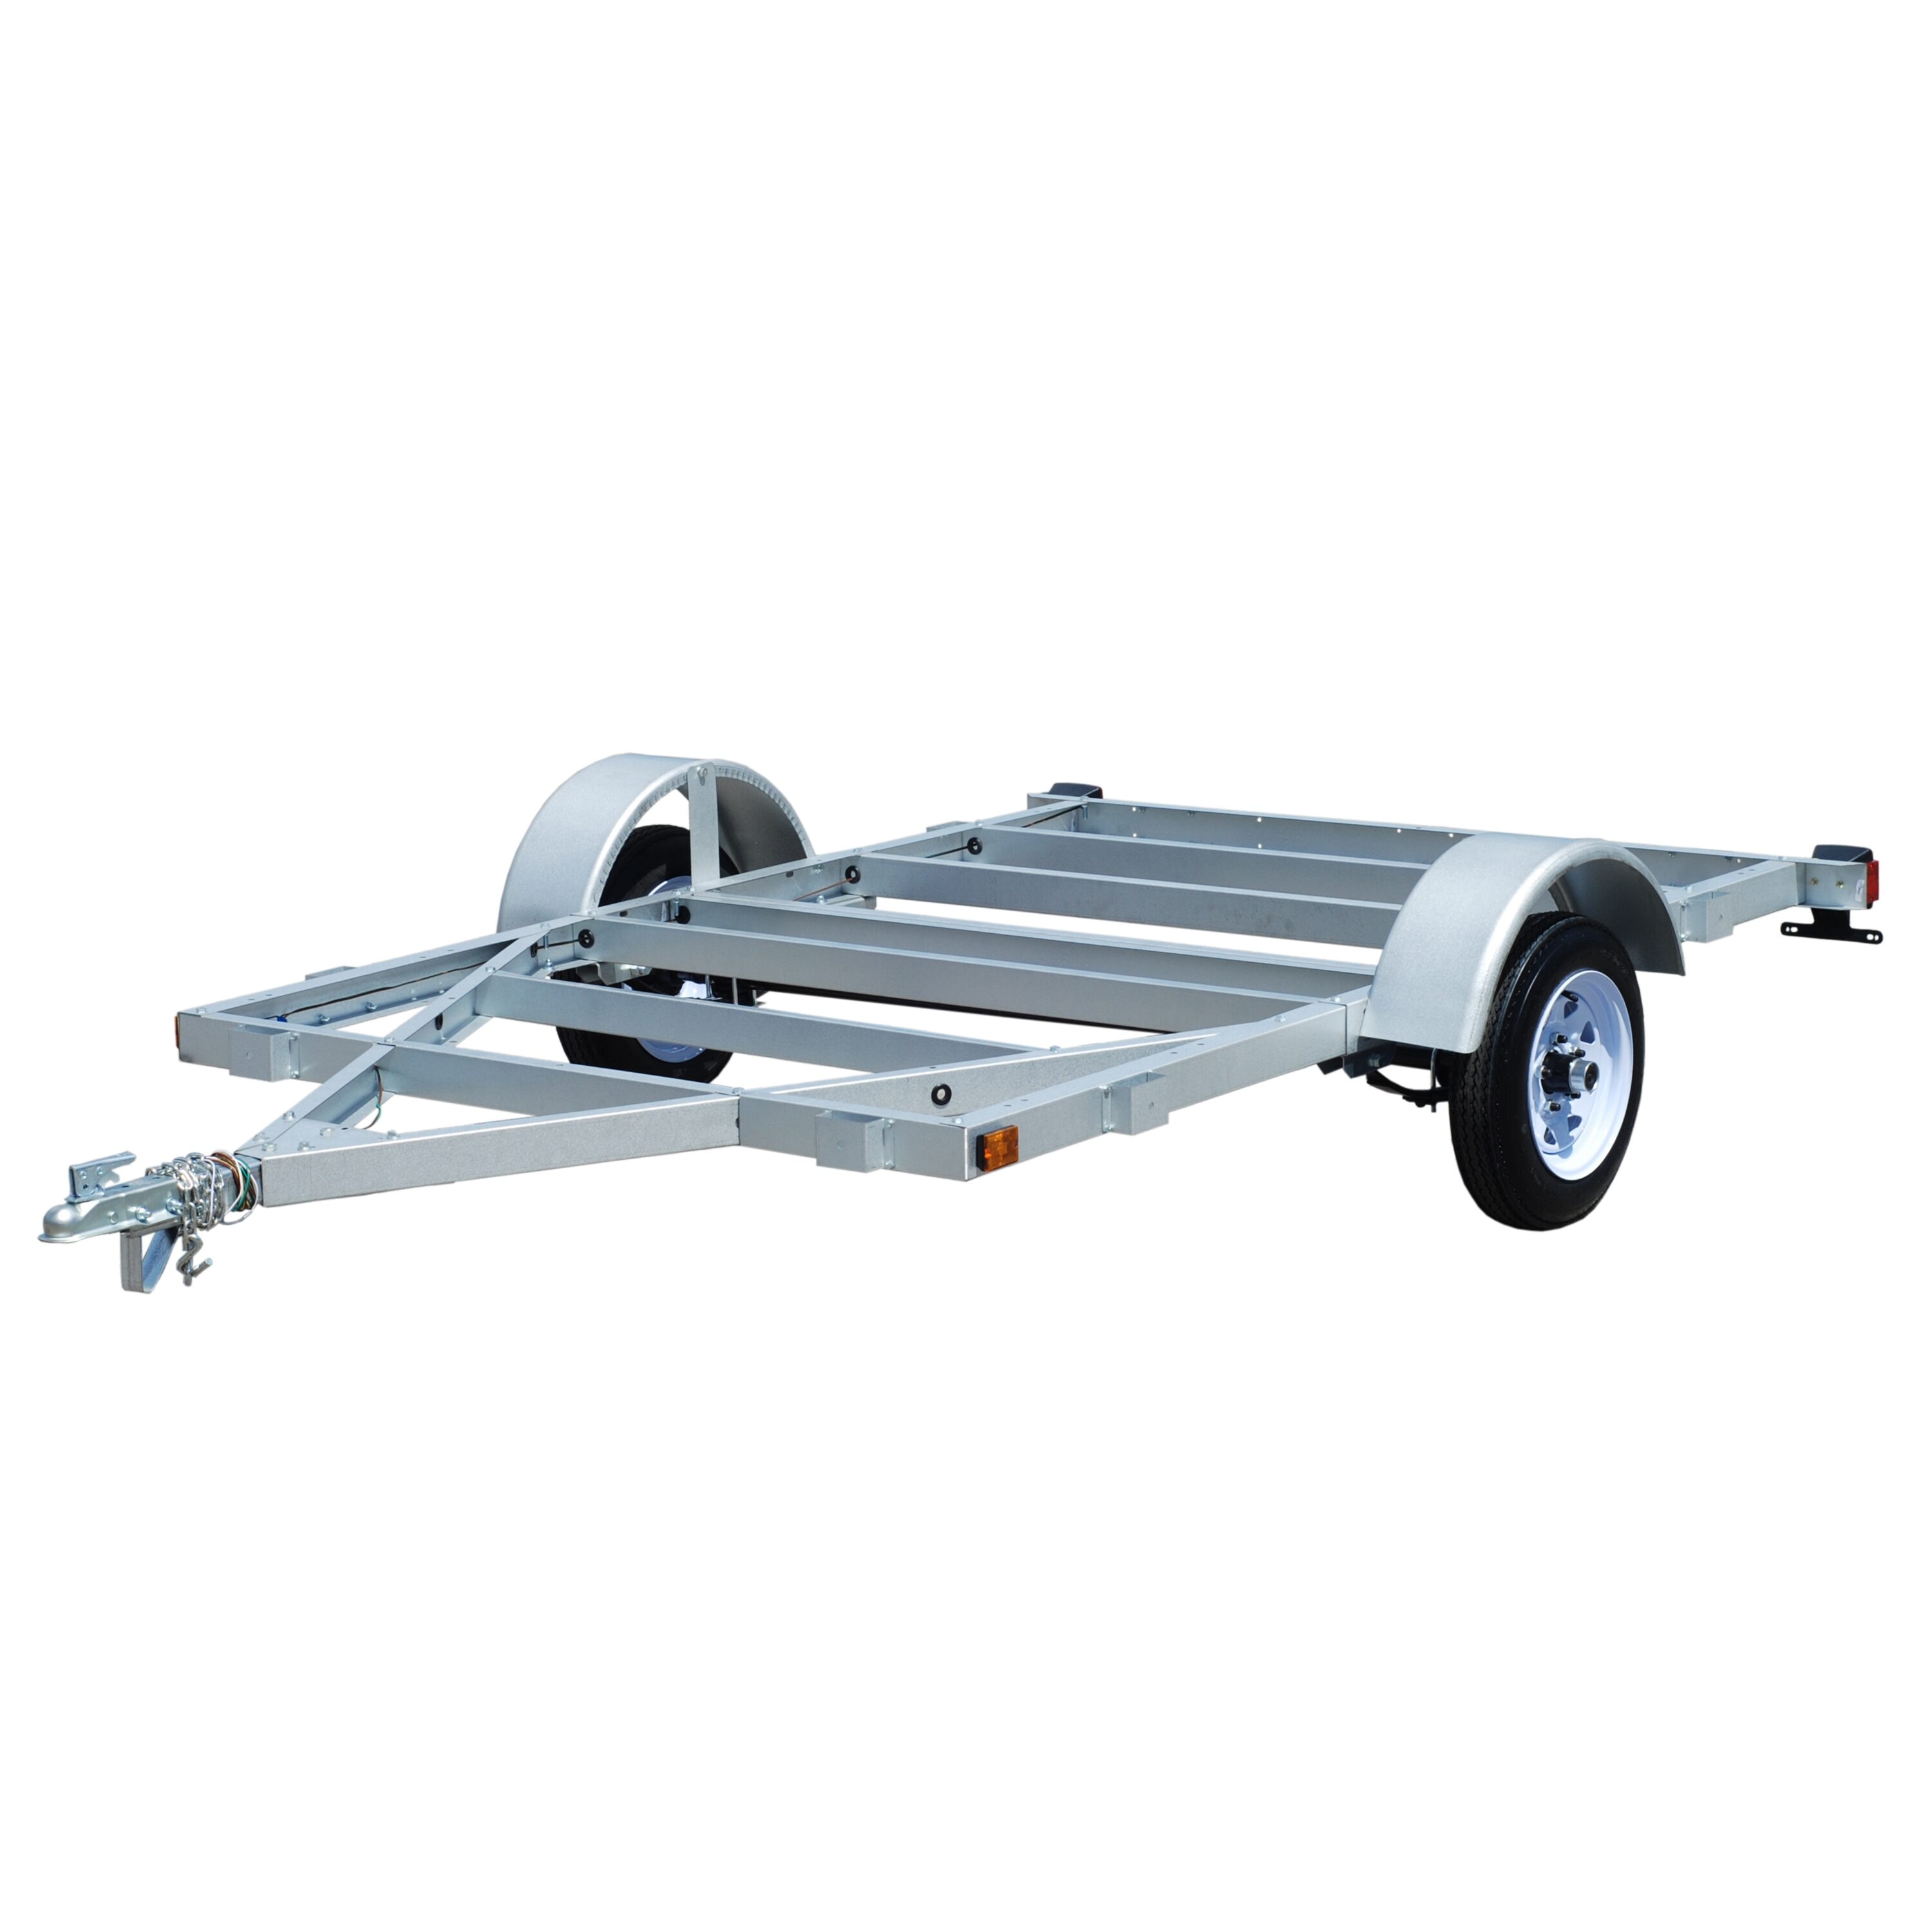 Stirling 5-ft x 8-ft Galvalume Steel Utility Trailer with 1250-lb Load Capacity, Steel Floor, E-Z Lube Hubs, and Dot Approved Lights | 504085